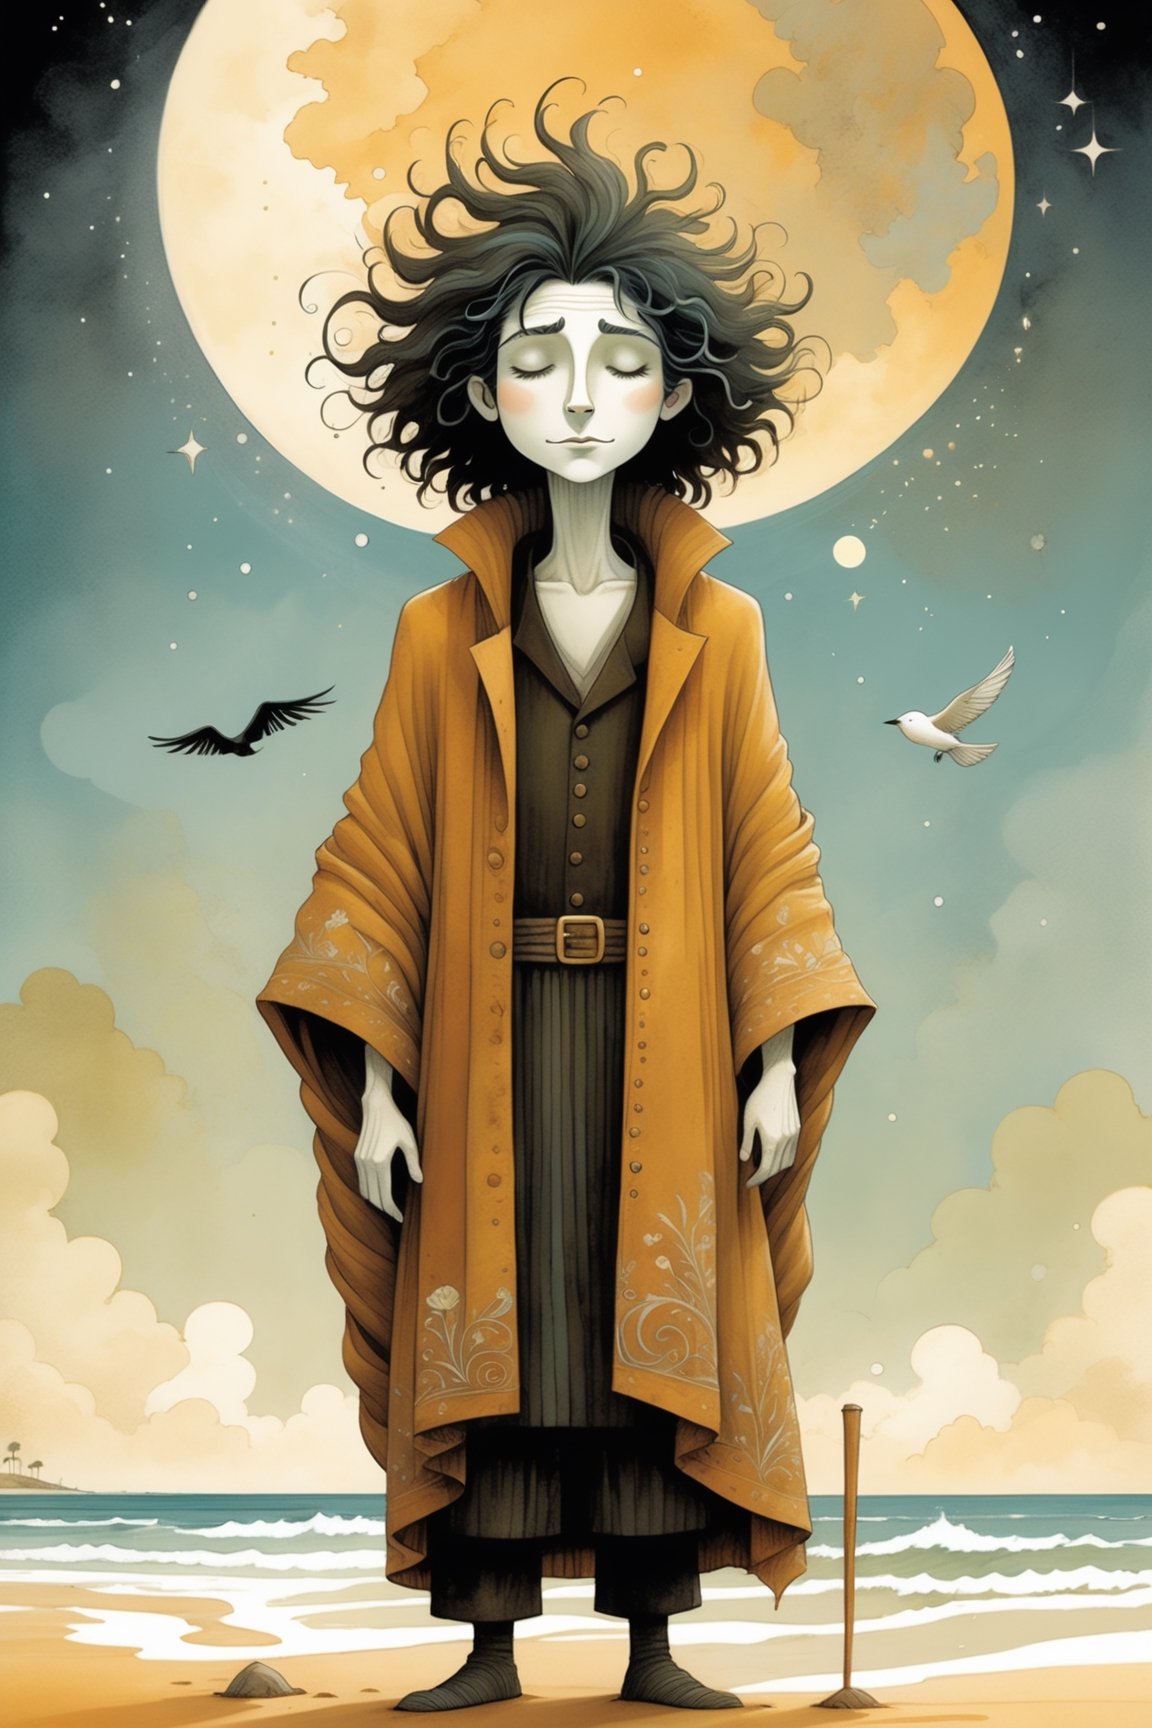 Sandman character from Neil Gaiman graphic novels,

perfect detailing, intricate details, mellow, muted hues, romantic, shabby-chic, dreamy artwork by oliver jeffers & jane newland   
